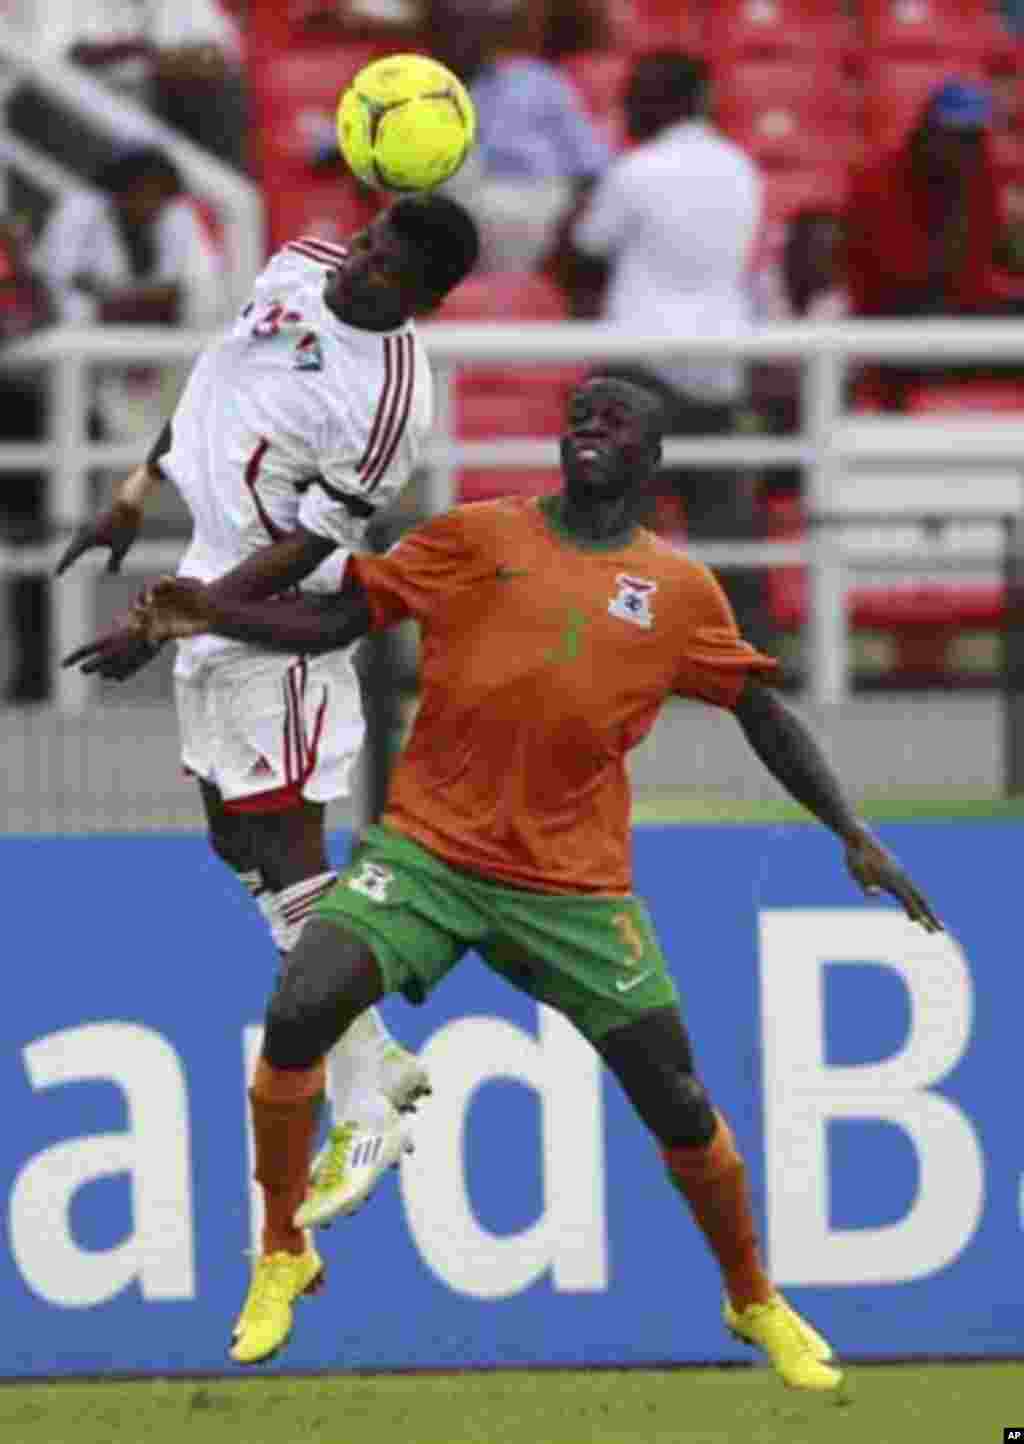 Chisamba Lungu of Zambia (R) fights for the ball with Khalefa Ahmed of Sudan during their African Nations Cup quarter-final soccer match at Estadio de Bata "Bata Stadium", in Bata February 4, 2012.